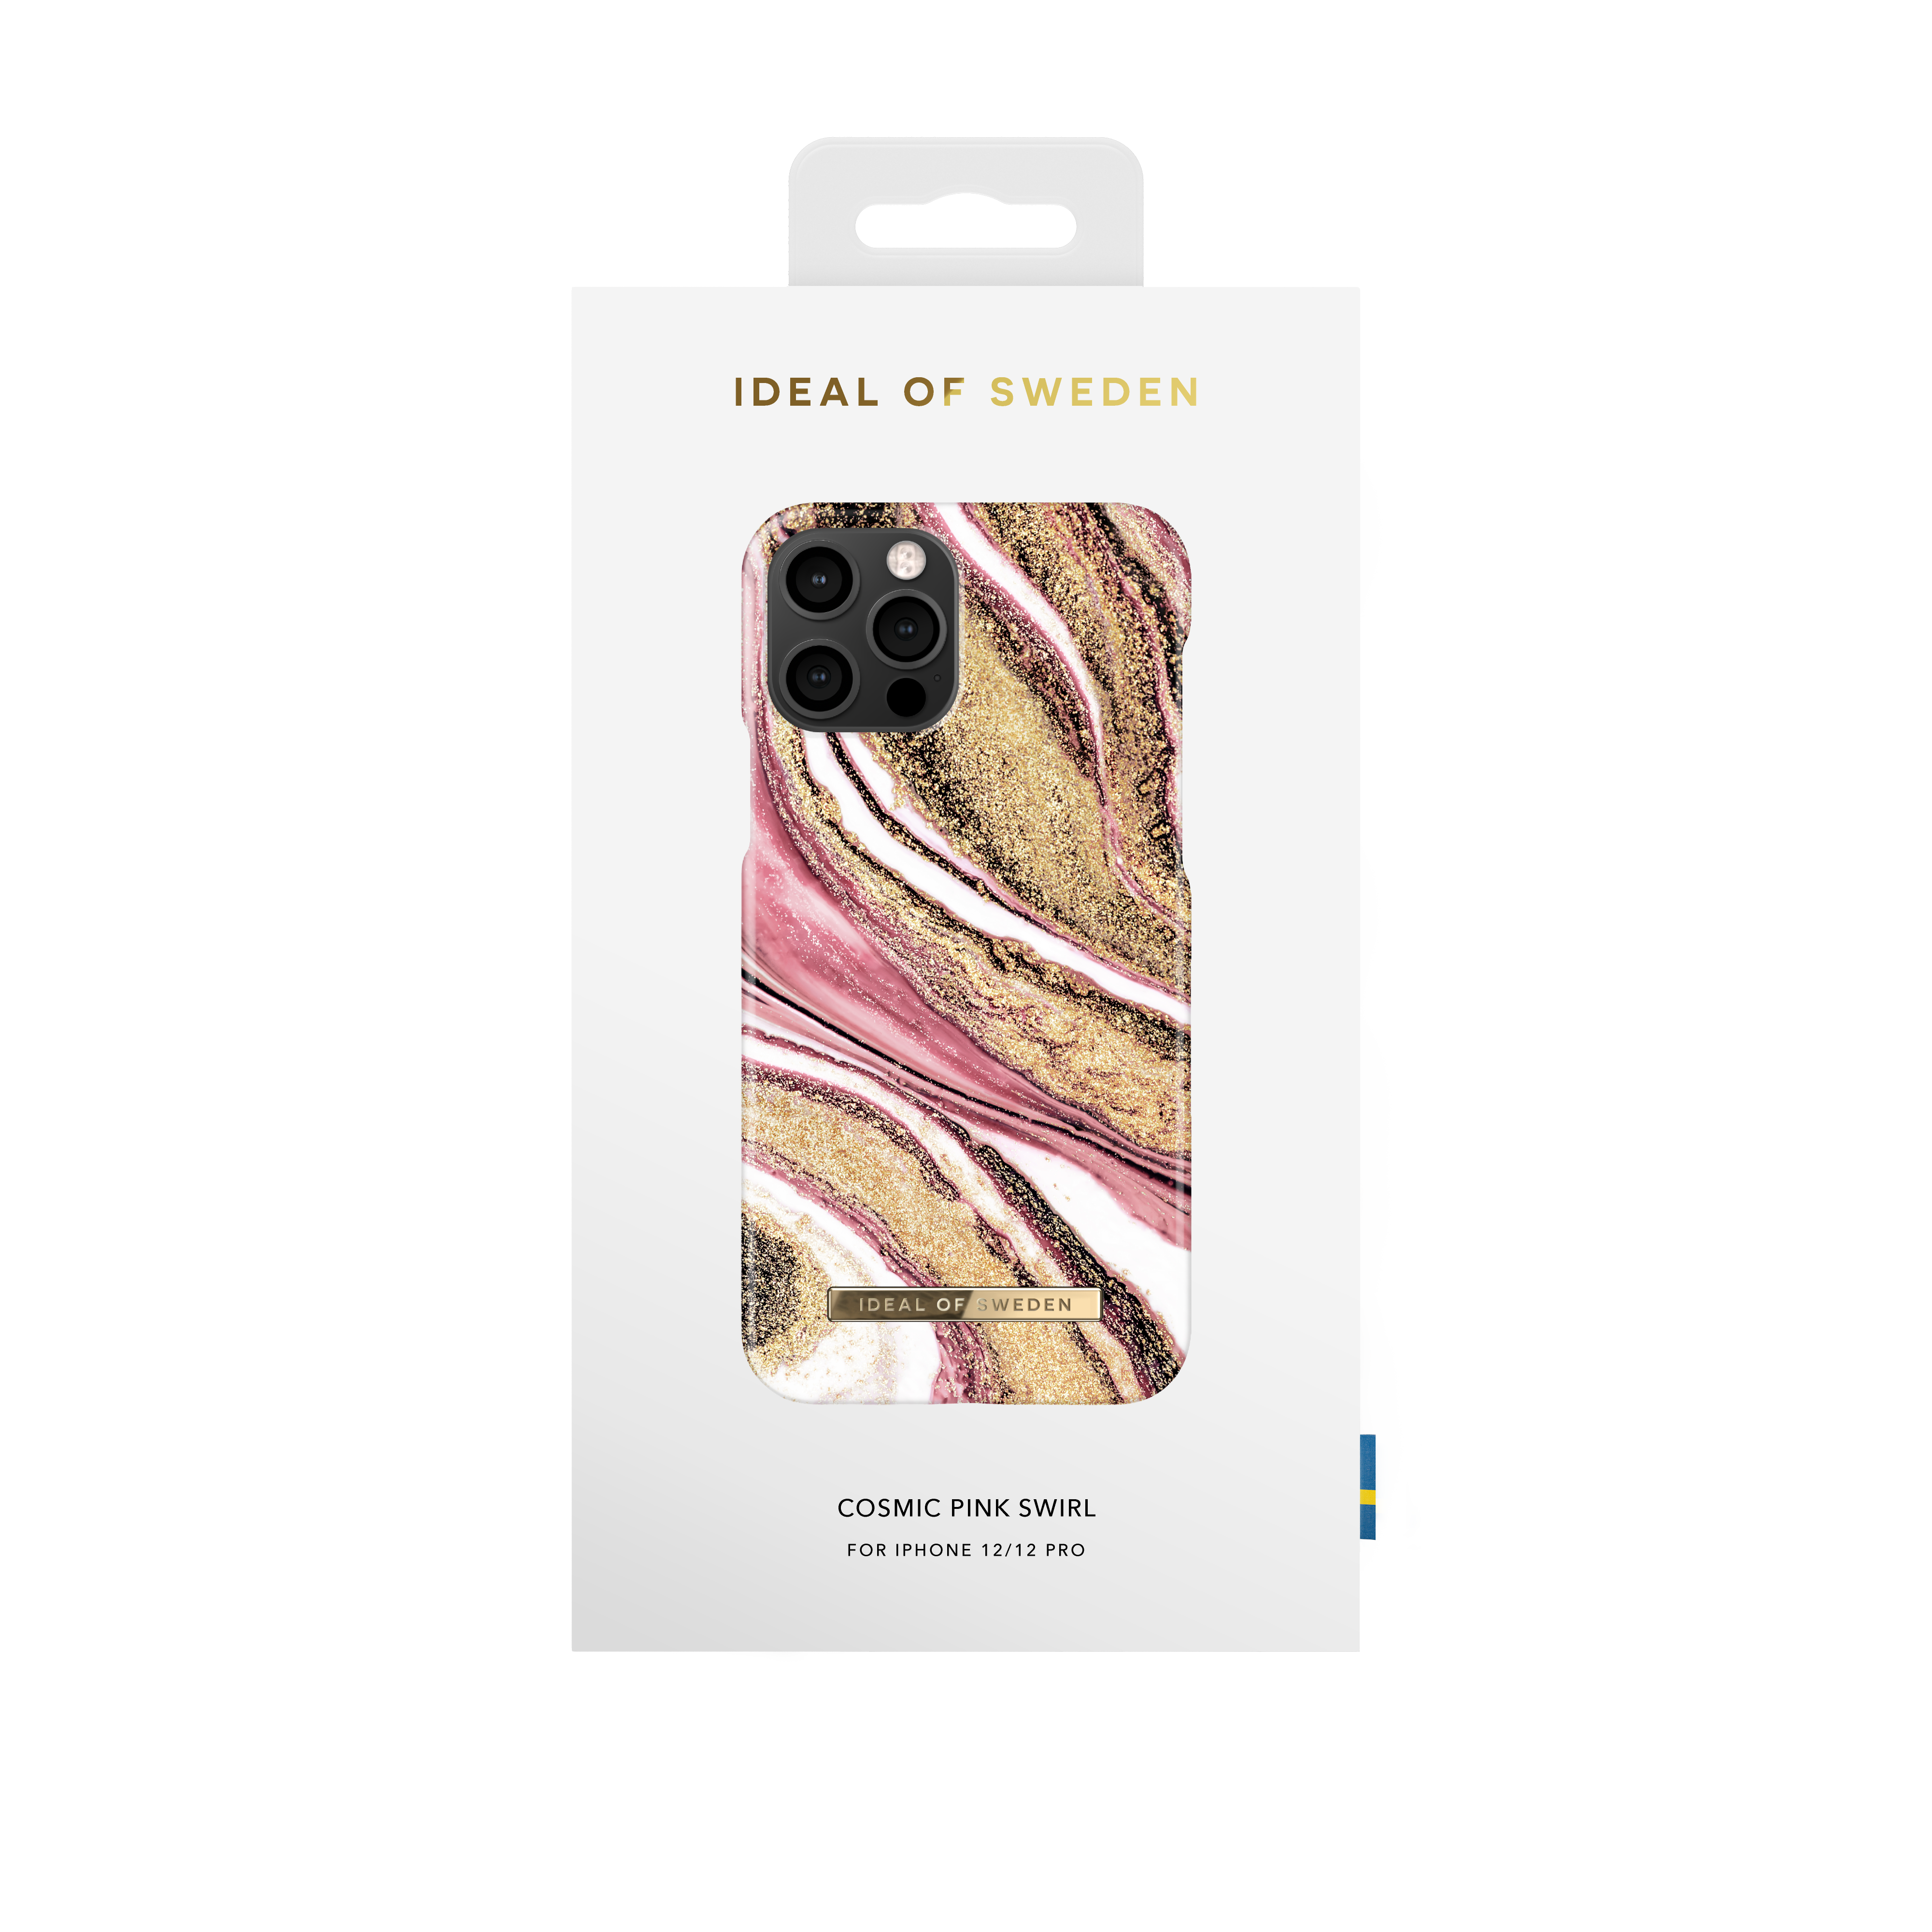 IDEAL OF Cosmic 12 iPhone SWEDEN Pro, IDFCSS20-I2061-193, Apple, Swirl iPhone 12, Backcover, Pink